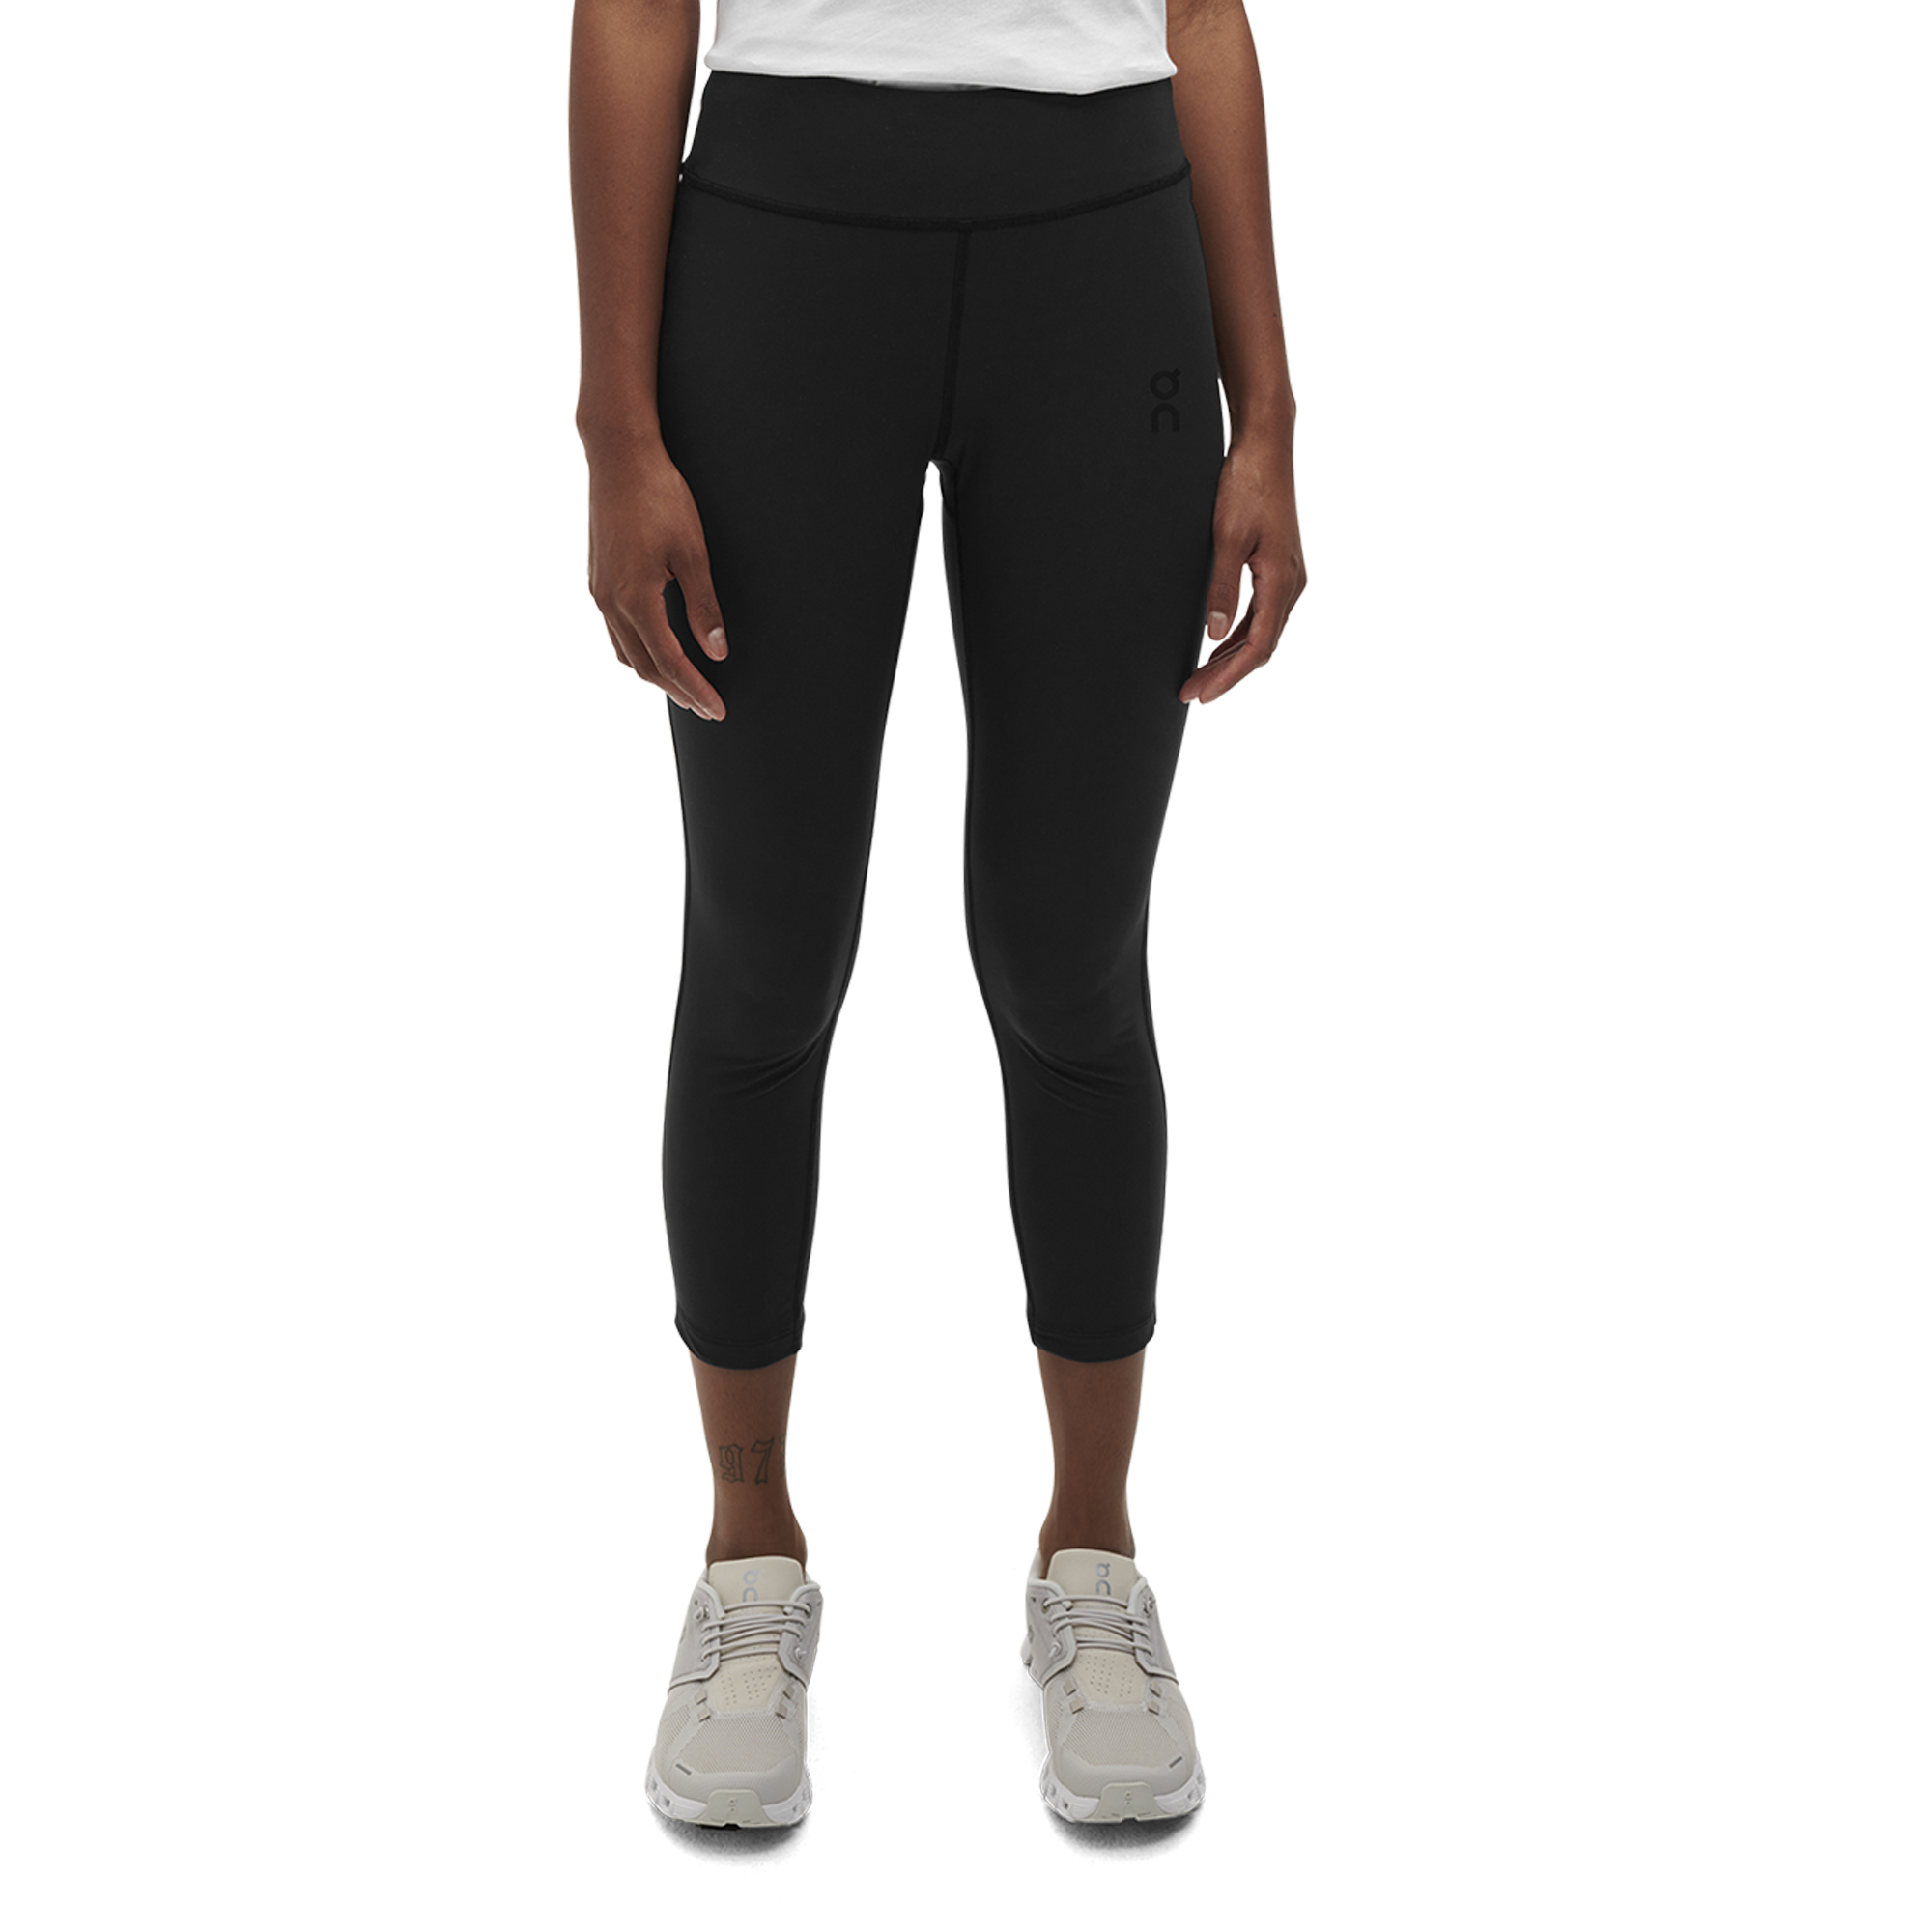 On Active Tight Womens APPAREL - Womens Tights BLACK